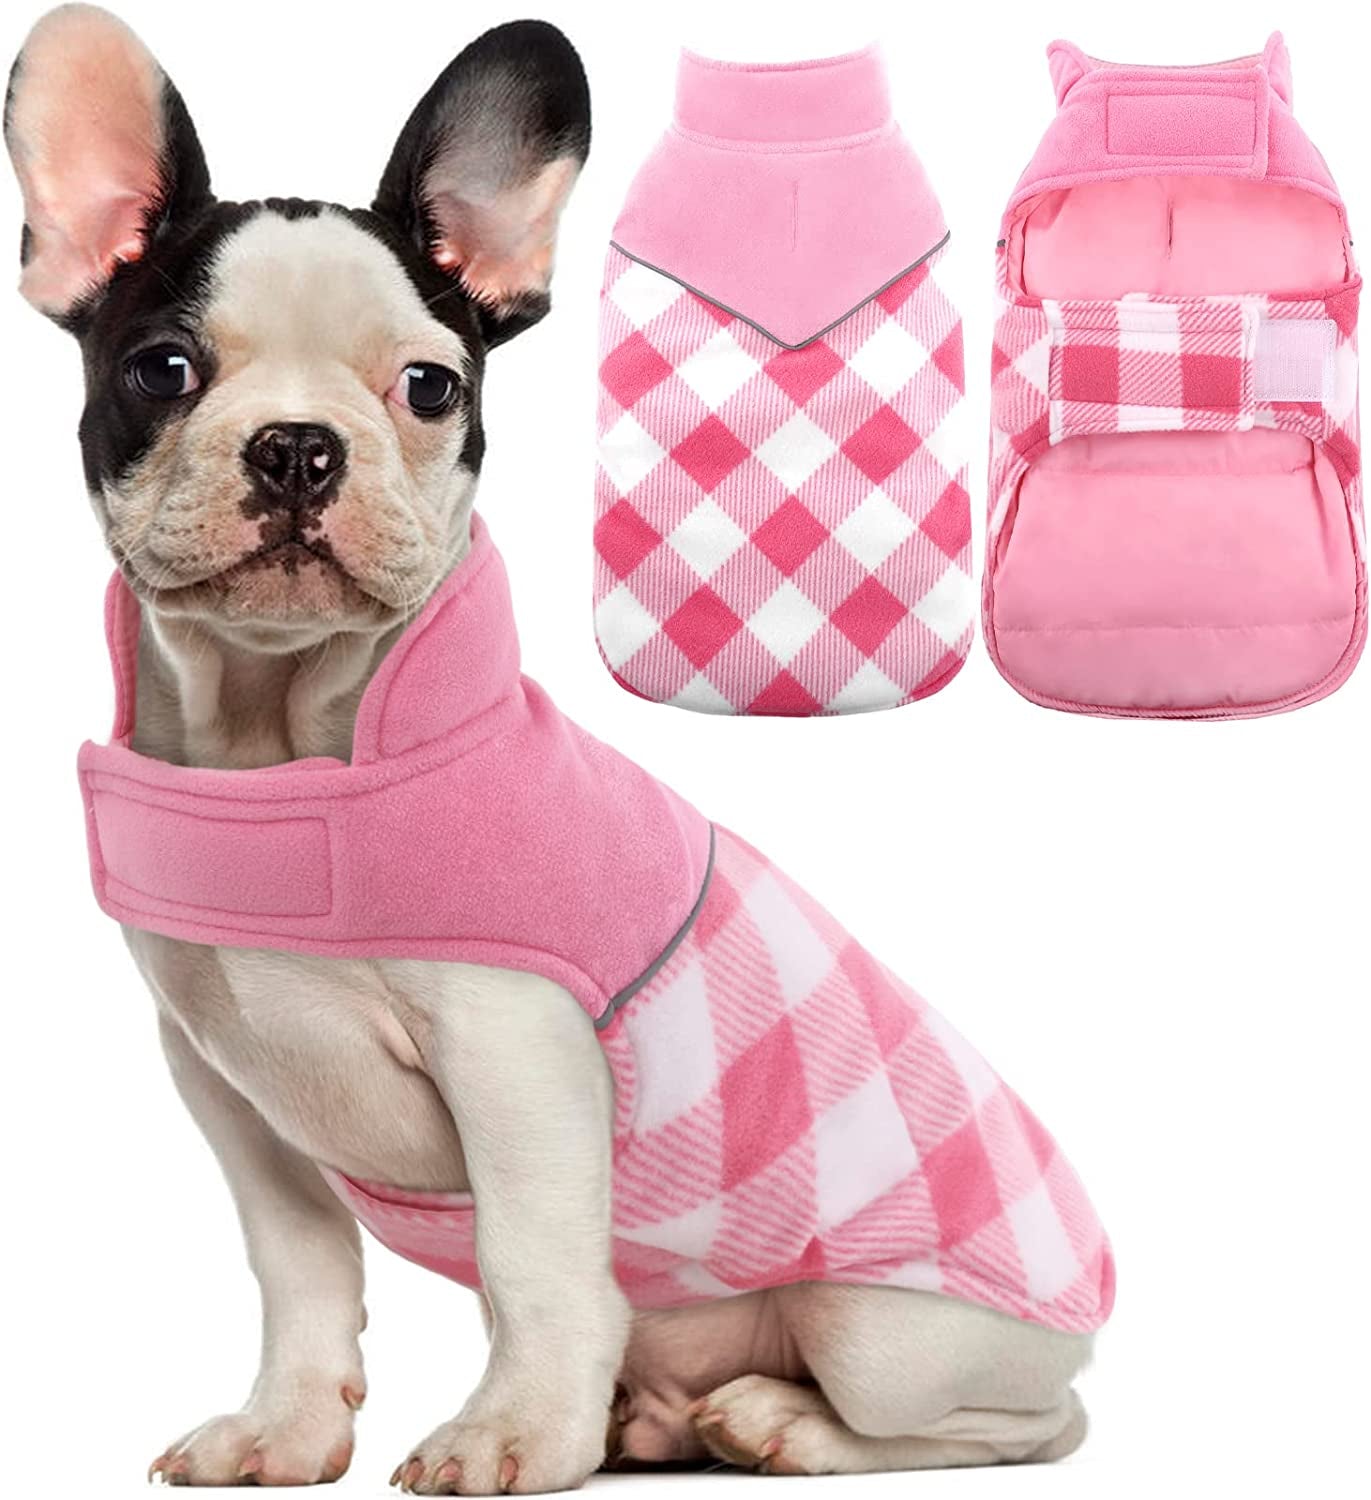 Kuoser Dog Winter Coat, Reversible Cold Weather Dog Jacket, Soft Warm Plaid Dog Coats, Puppy Waterproof Thickened Vest Windproof Outdoor Apparel for Small Medium and Large Dogs